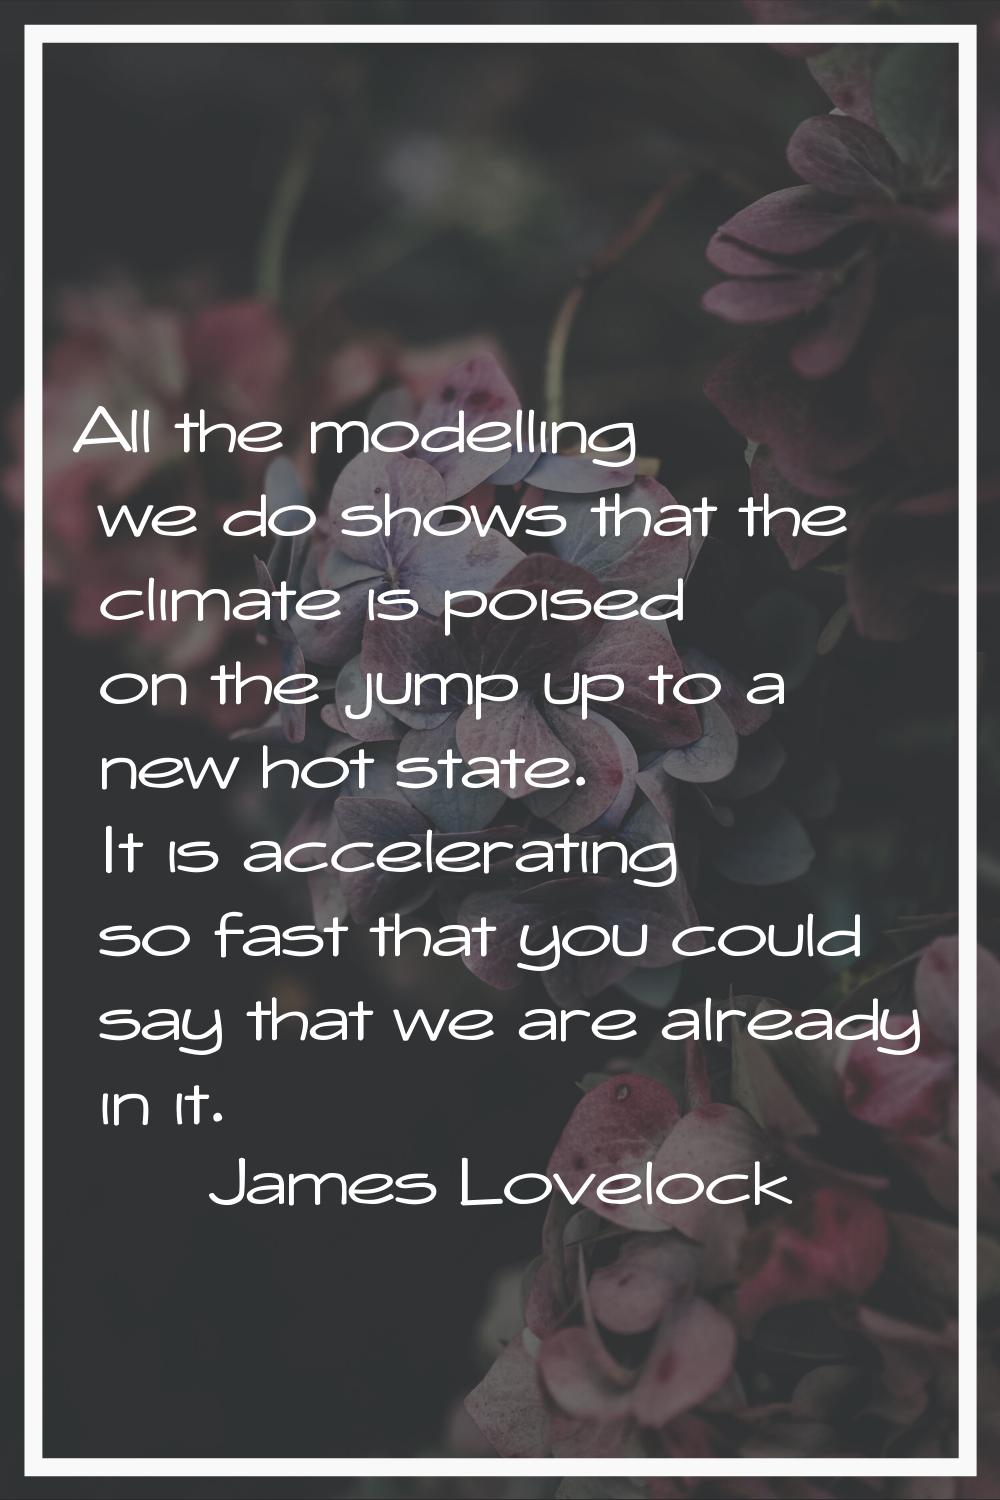 All the modelling we do shows that the climate is poised on the jump up to a new hot state. It is a